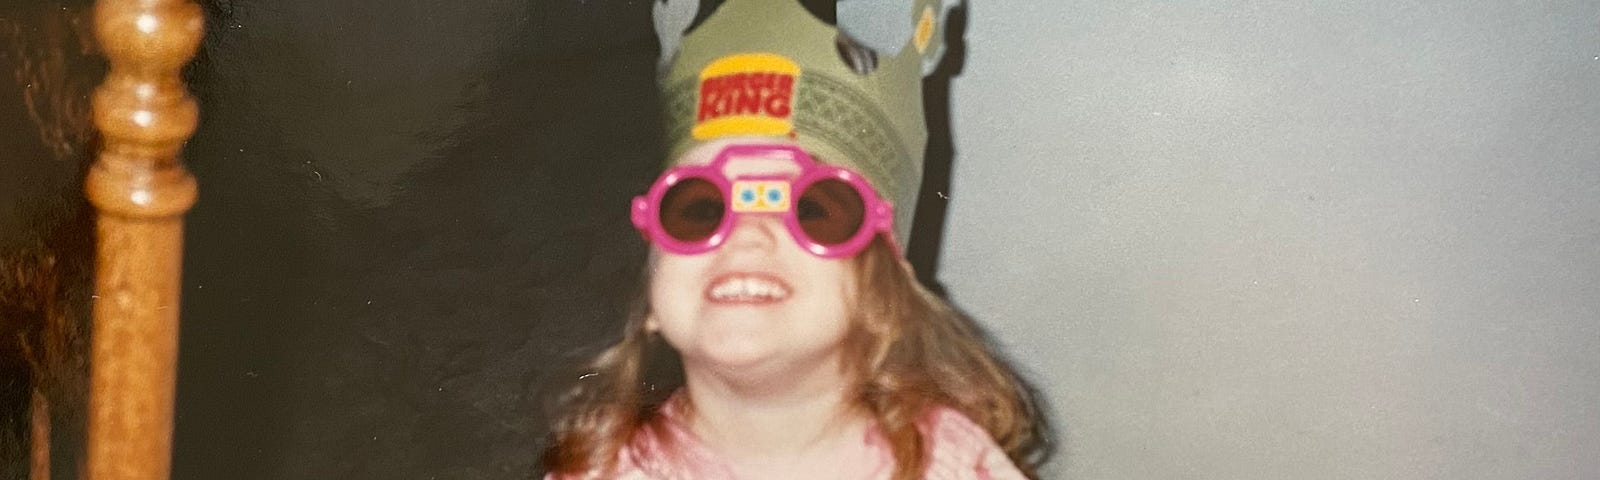 Donning a Burger King crown from the ’90s, I flash a cheesy grin behind children’s sunglasses.